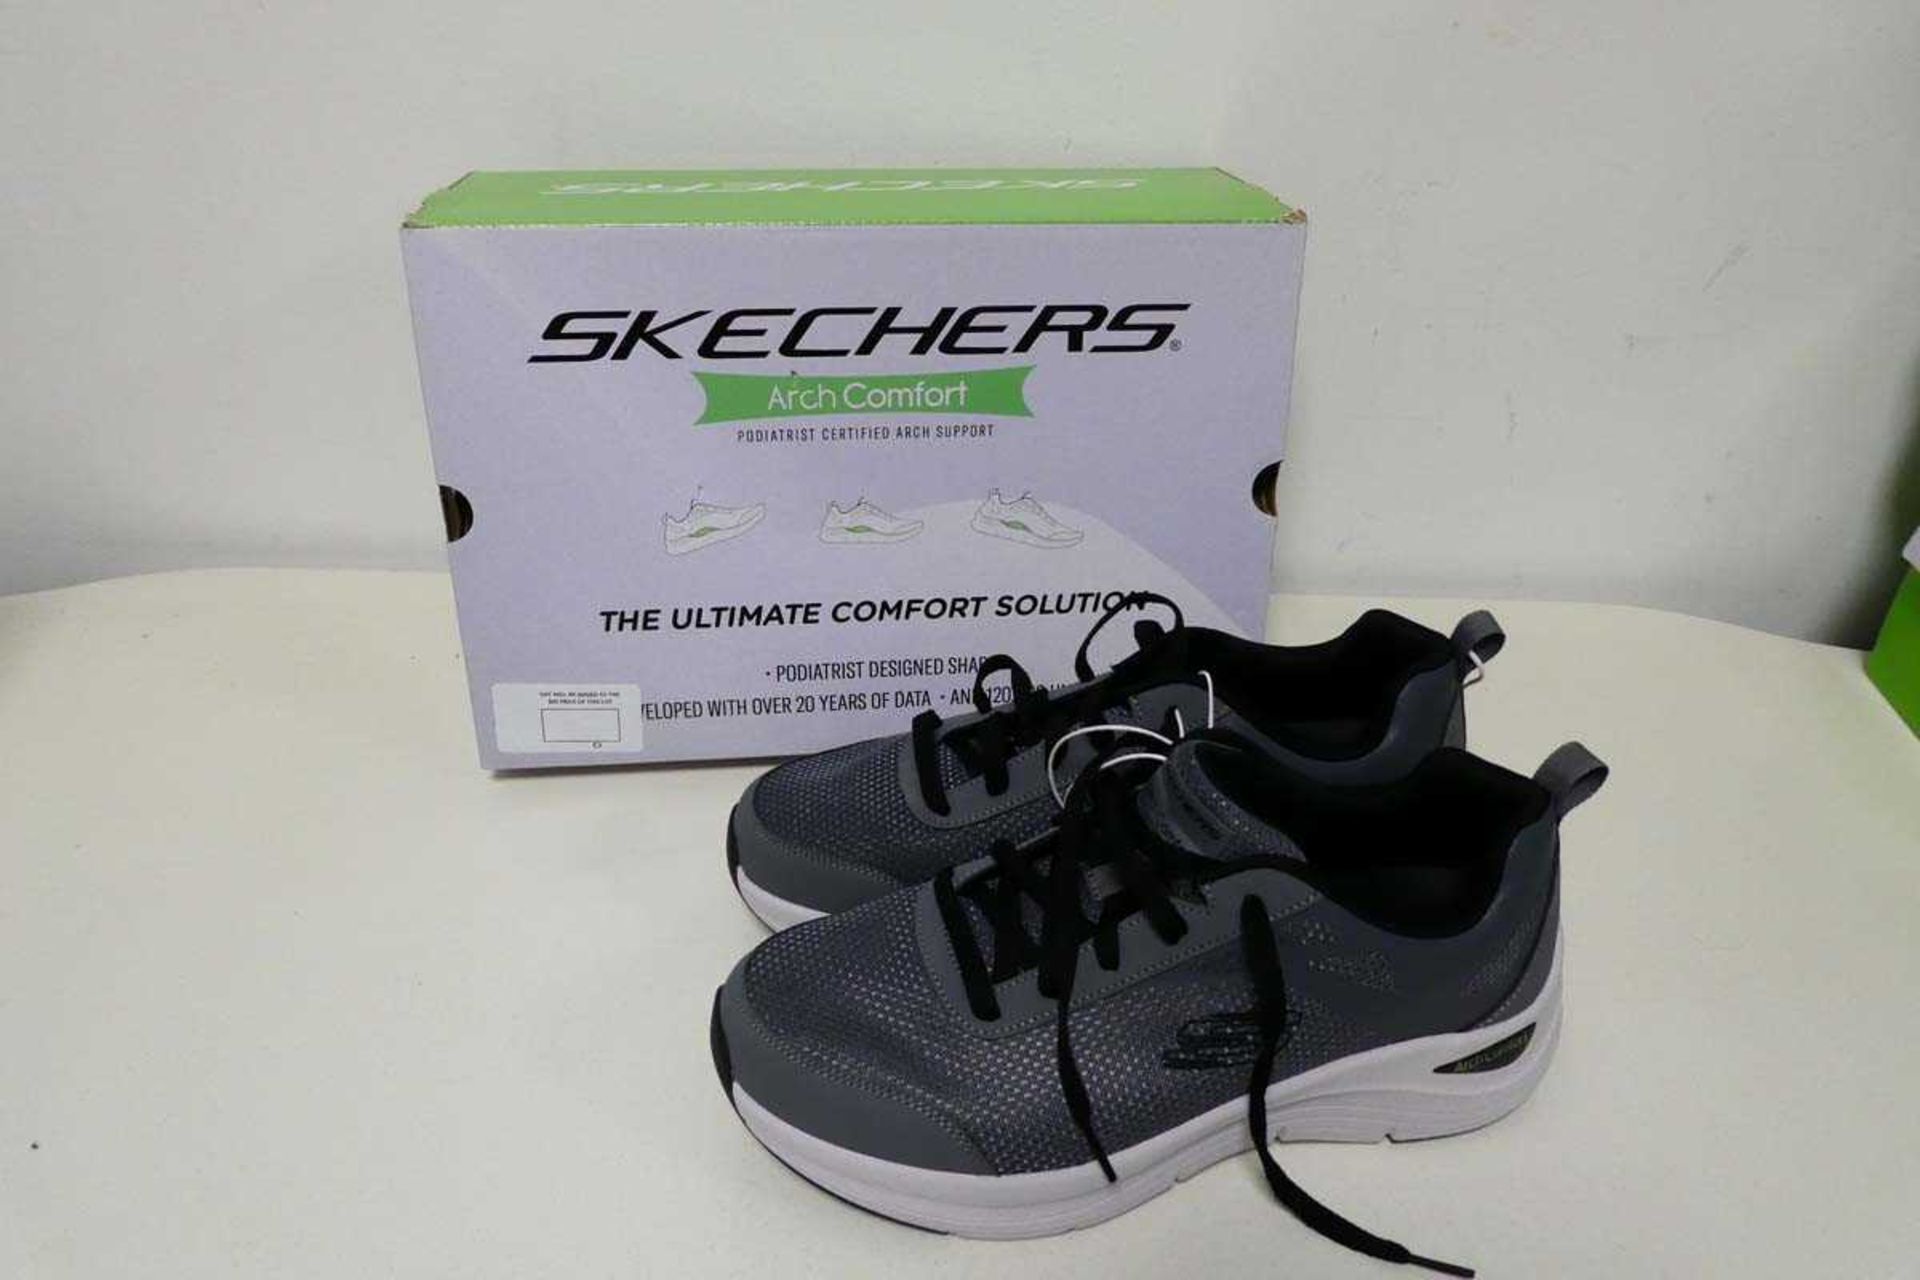 +VAT Boxed pair of men's Skechers arch comfort trainers in grey size 9